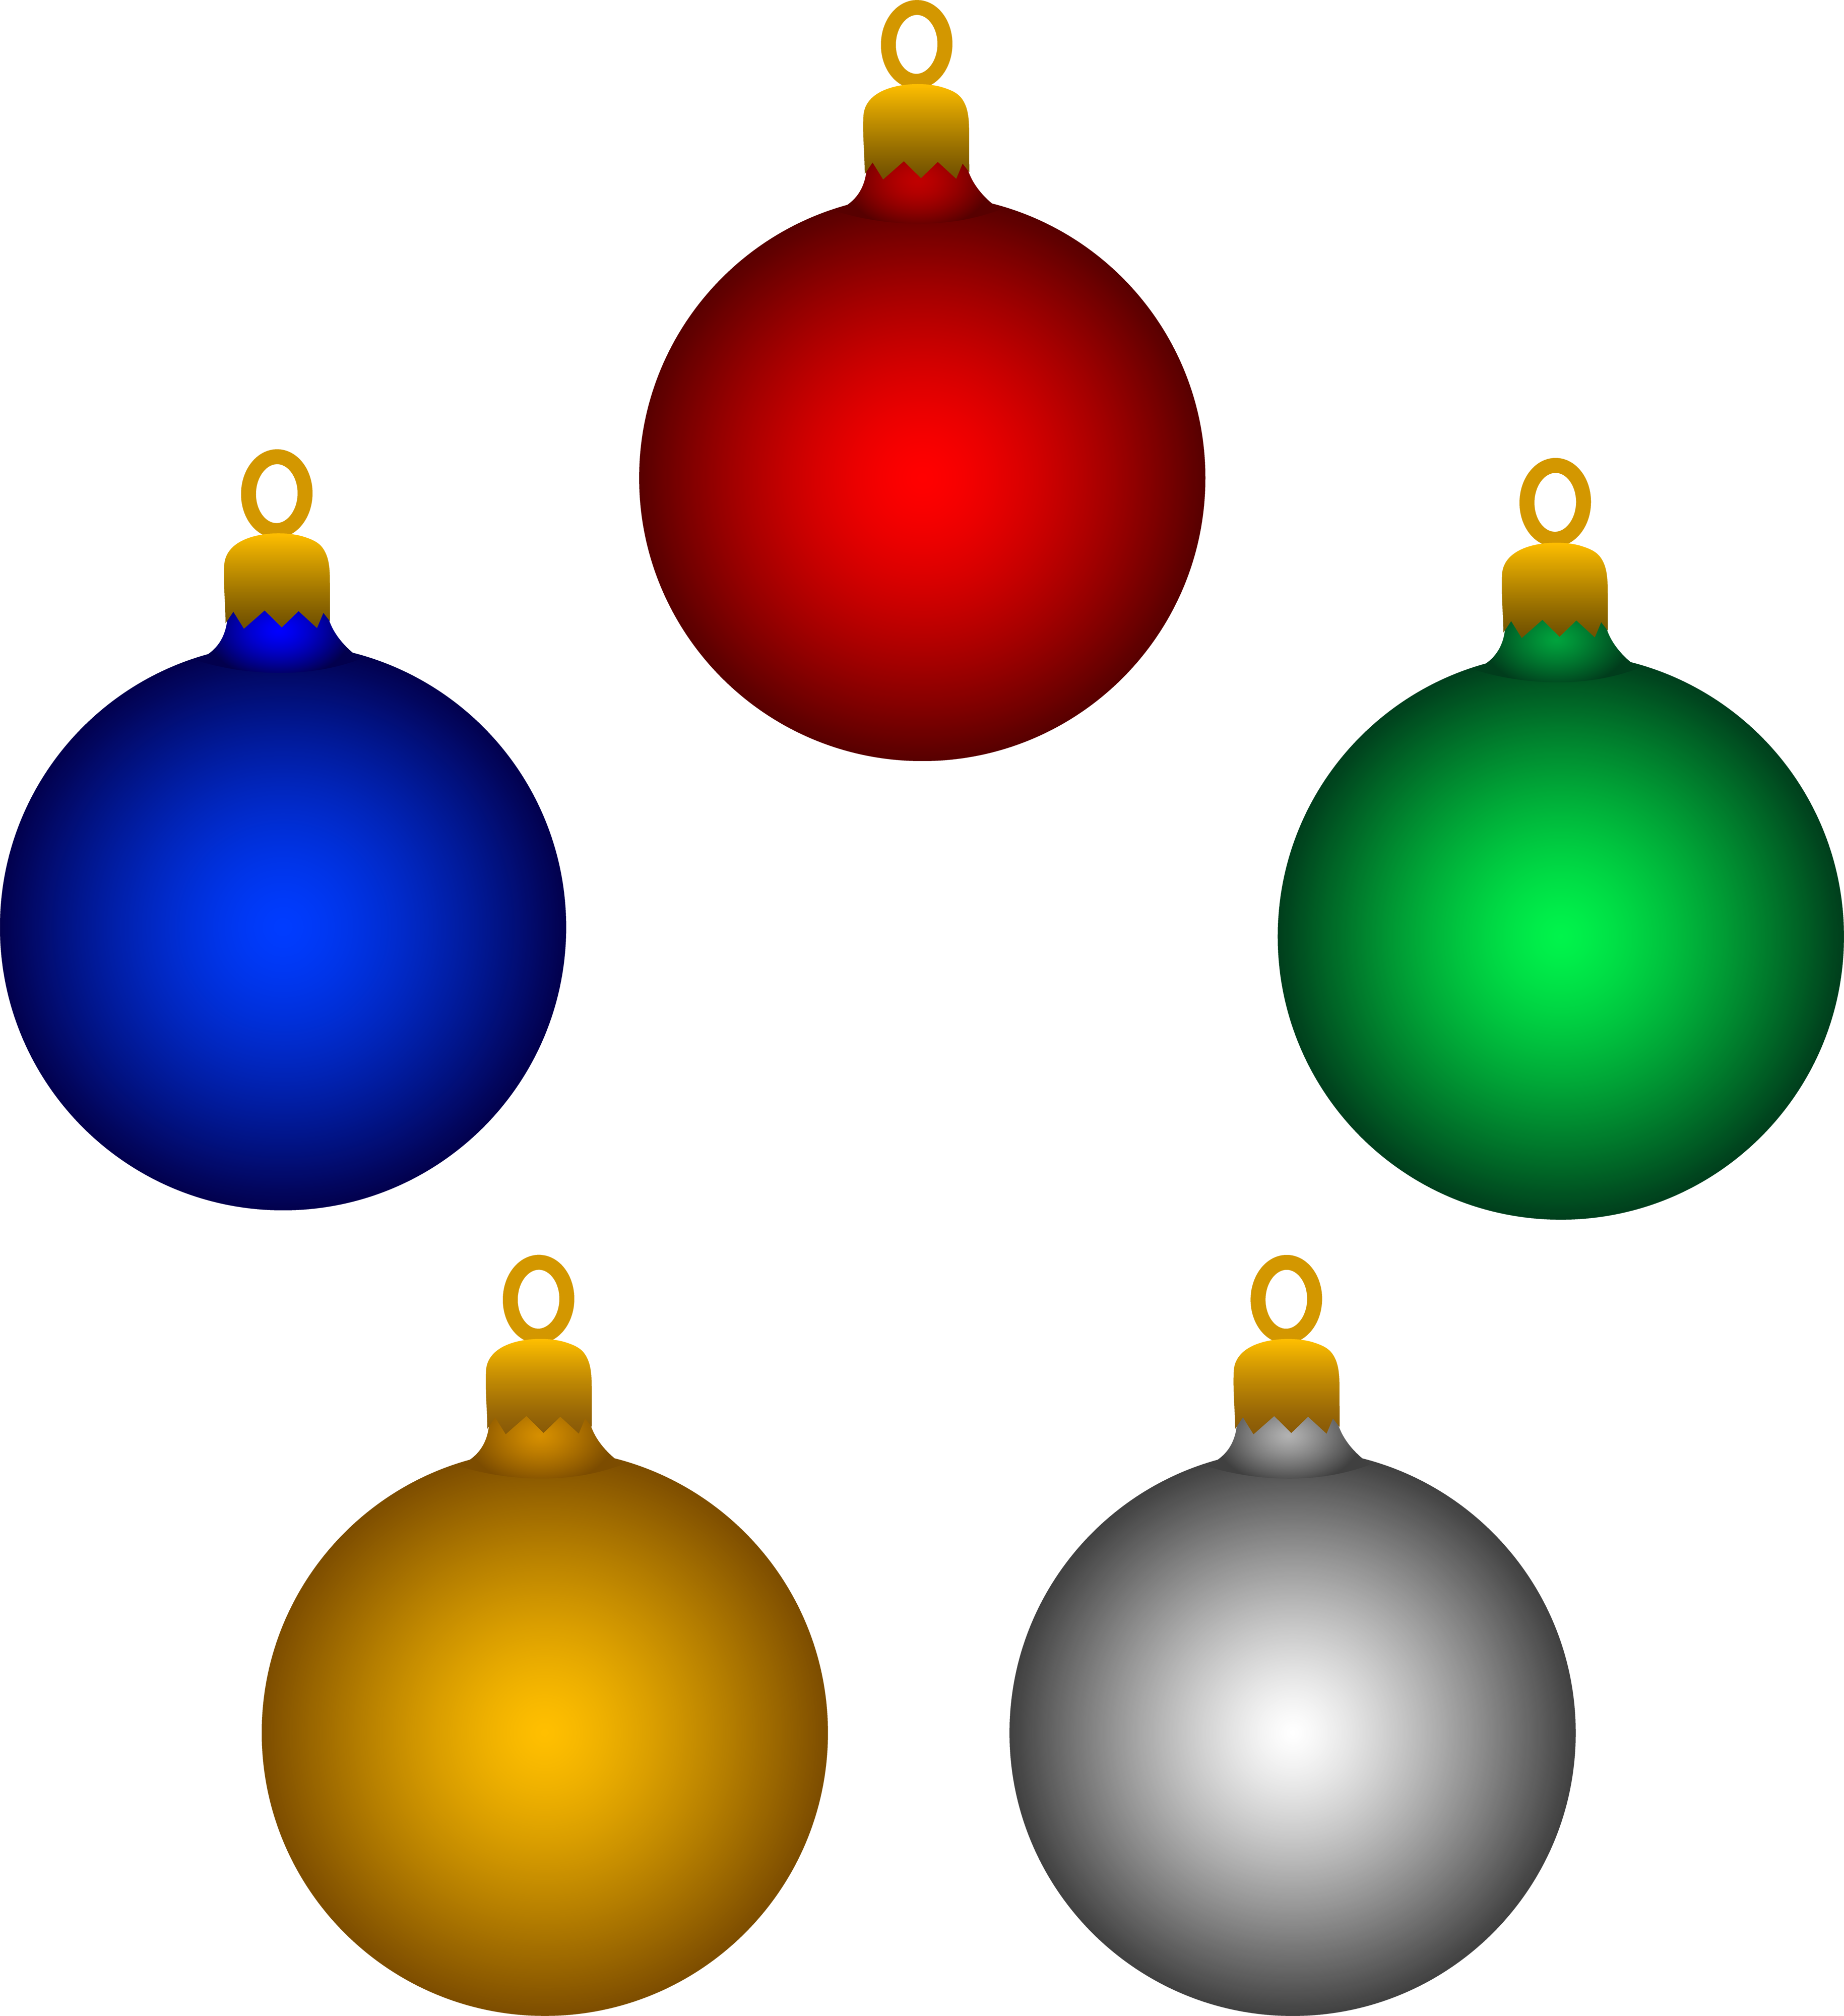 Free Pictures On Christmas Ornaments, Download Free Clip Art